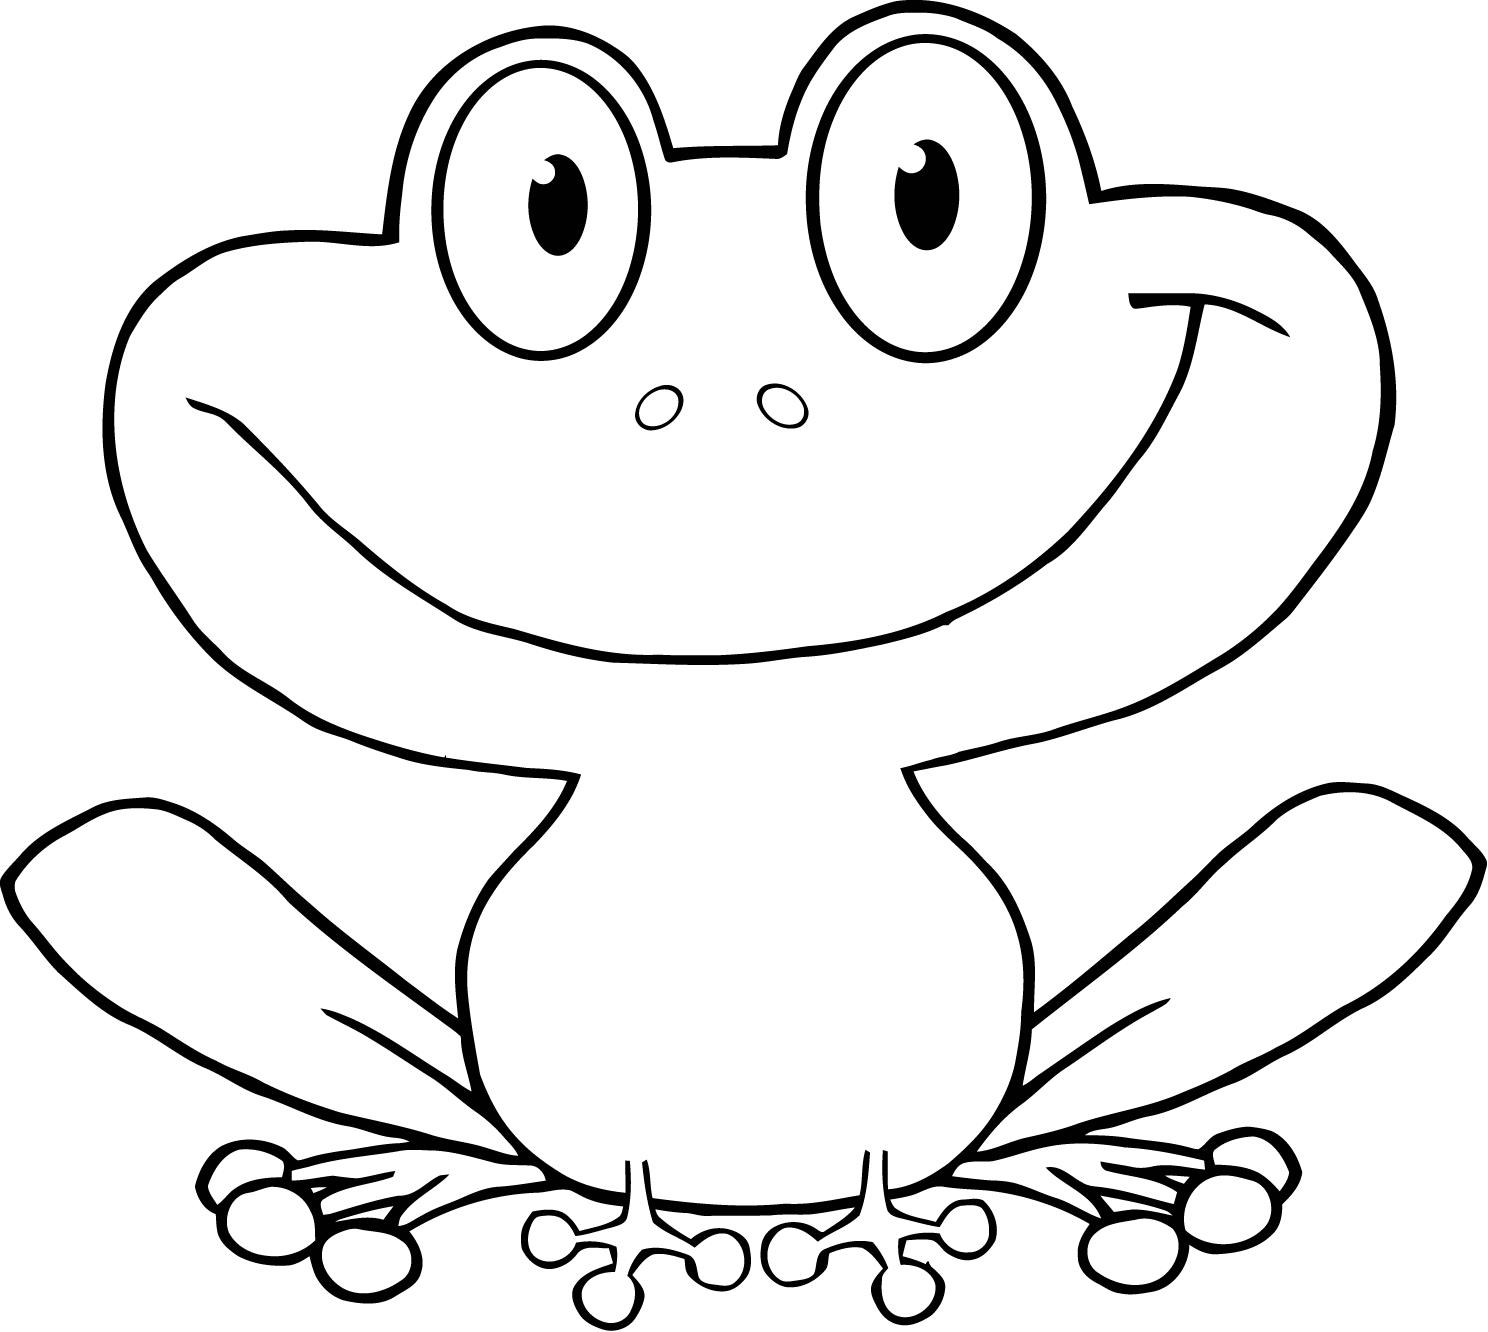 How To Draw A Cartoon Frog - ClipArt Best